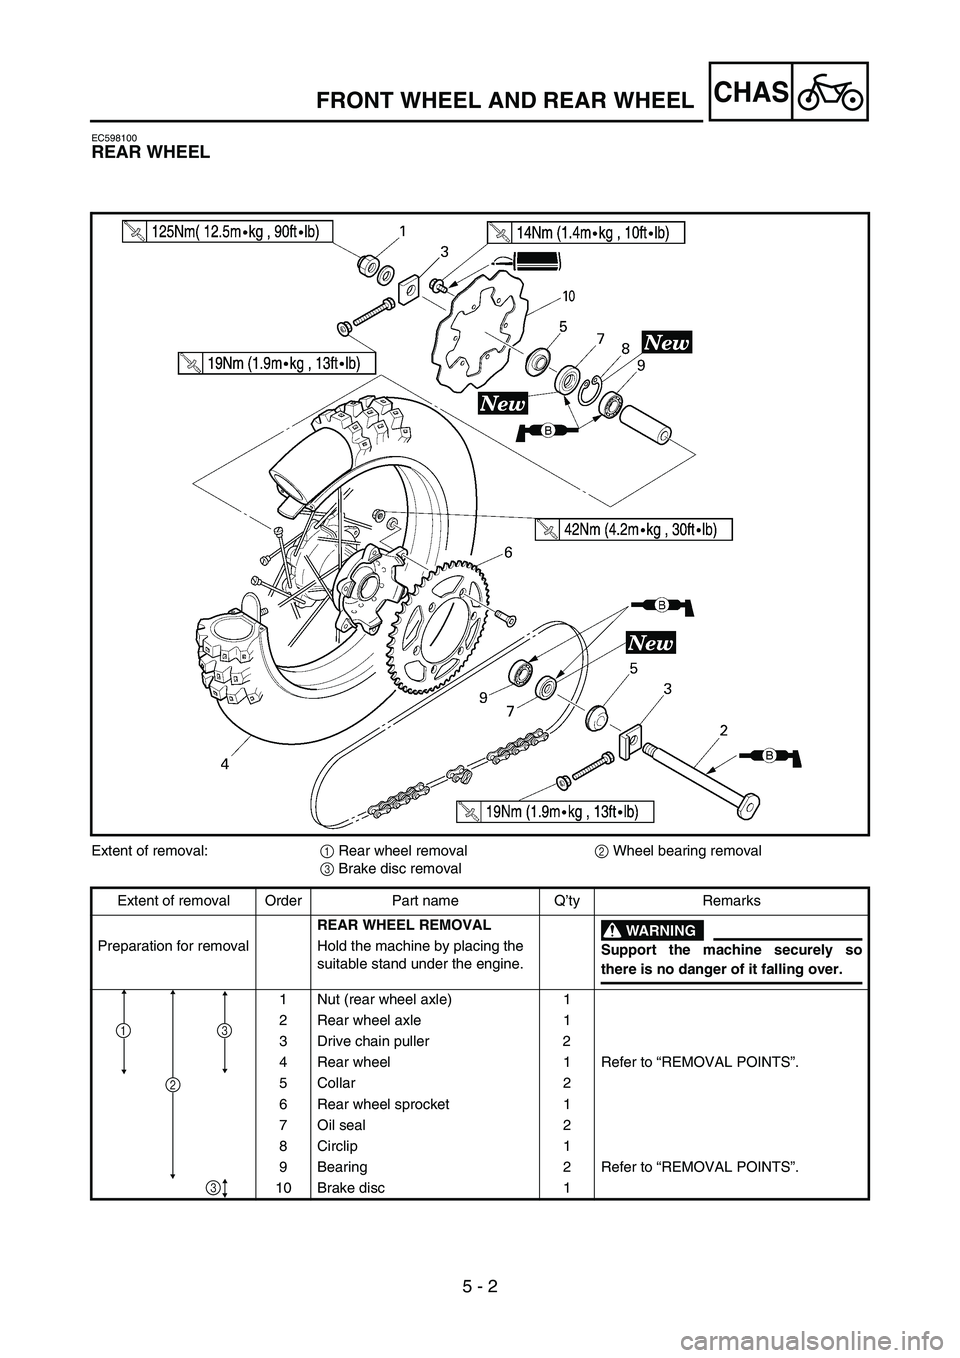 YAMAHA YZ250F 2007  Owners Manual 5 - 2
CHAS
EC598100
REAR WHEEL
Extent of removal:
1 Rear wheel removal
2 Wheel bearing removal
3 Brake disc removal
Extent of removal Order Part name Q’ty Remarks
REAR WHEEL REMOVAL
WARNING
Support 